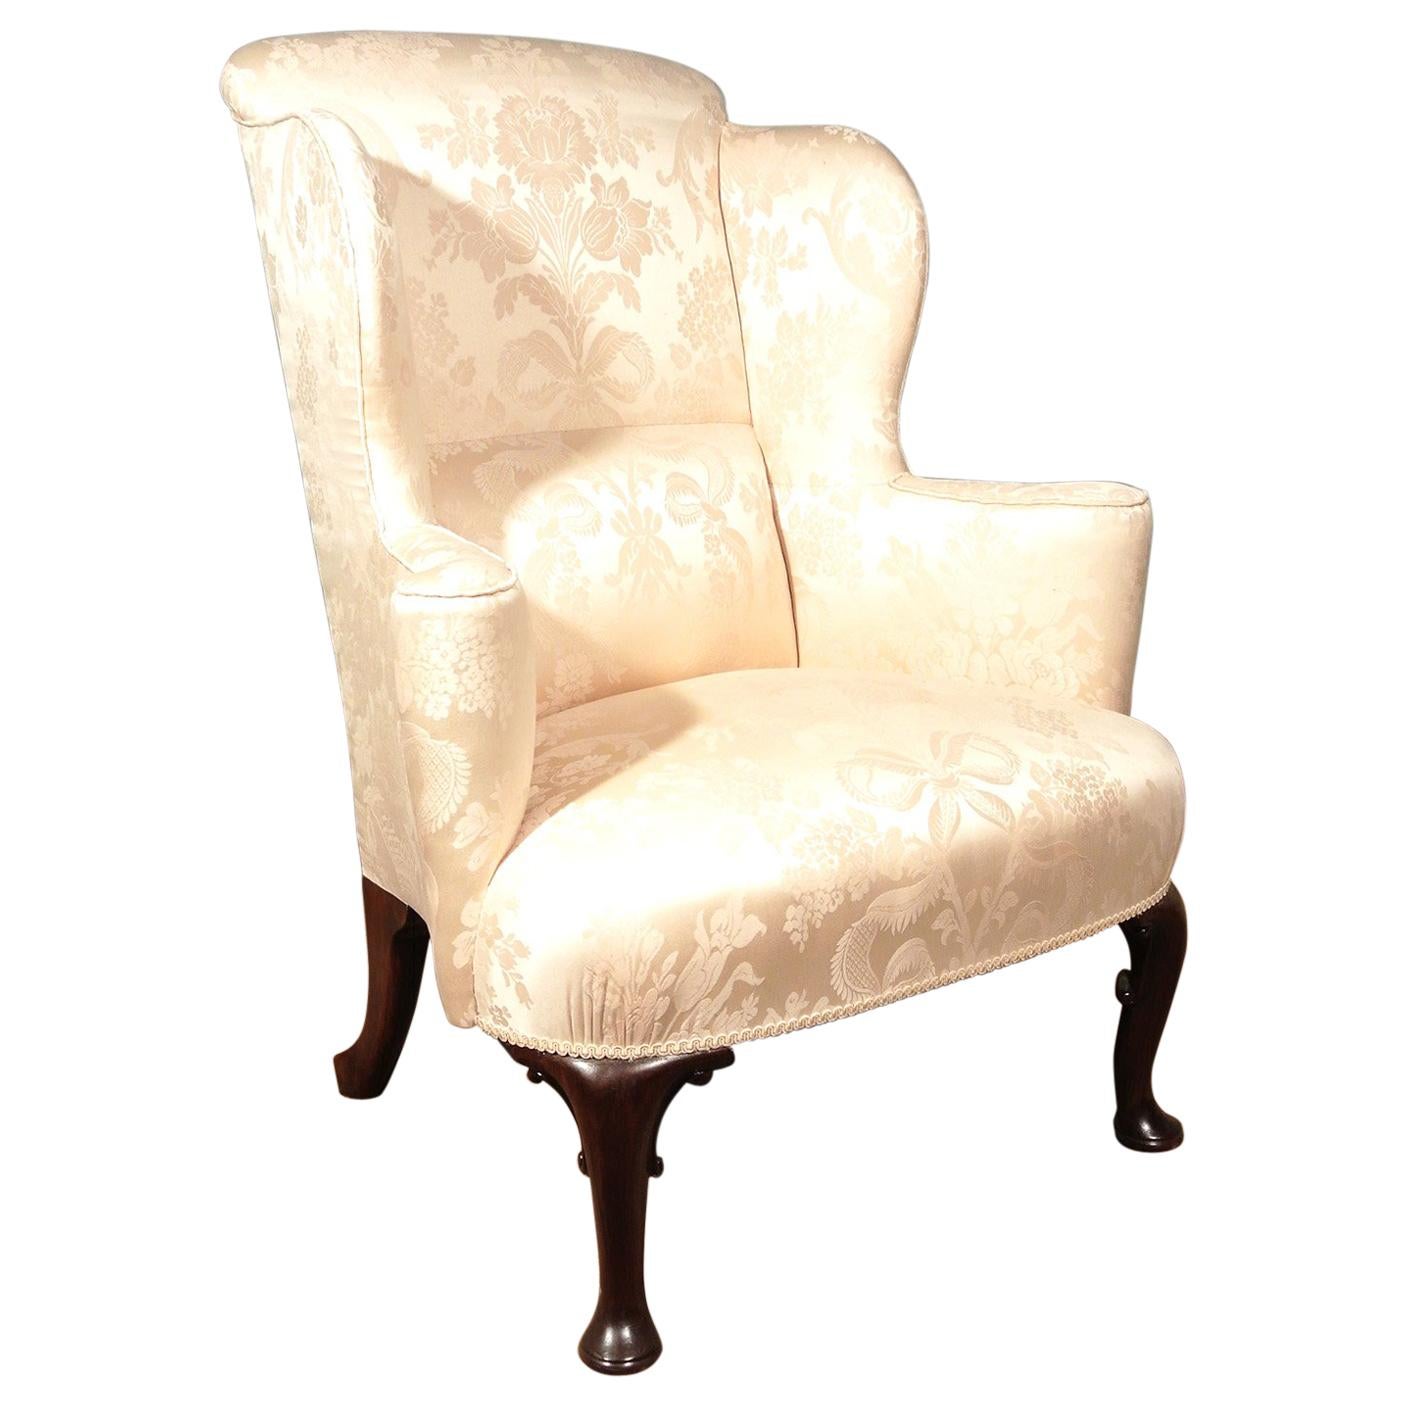 George III Walnut Wing Back Chair in Pale Cream, circa 1780 For Sale